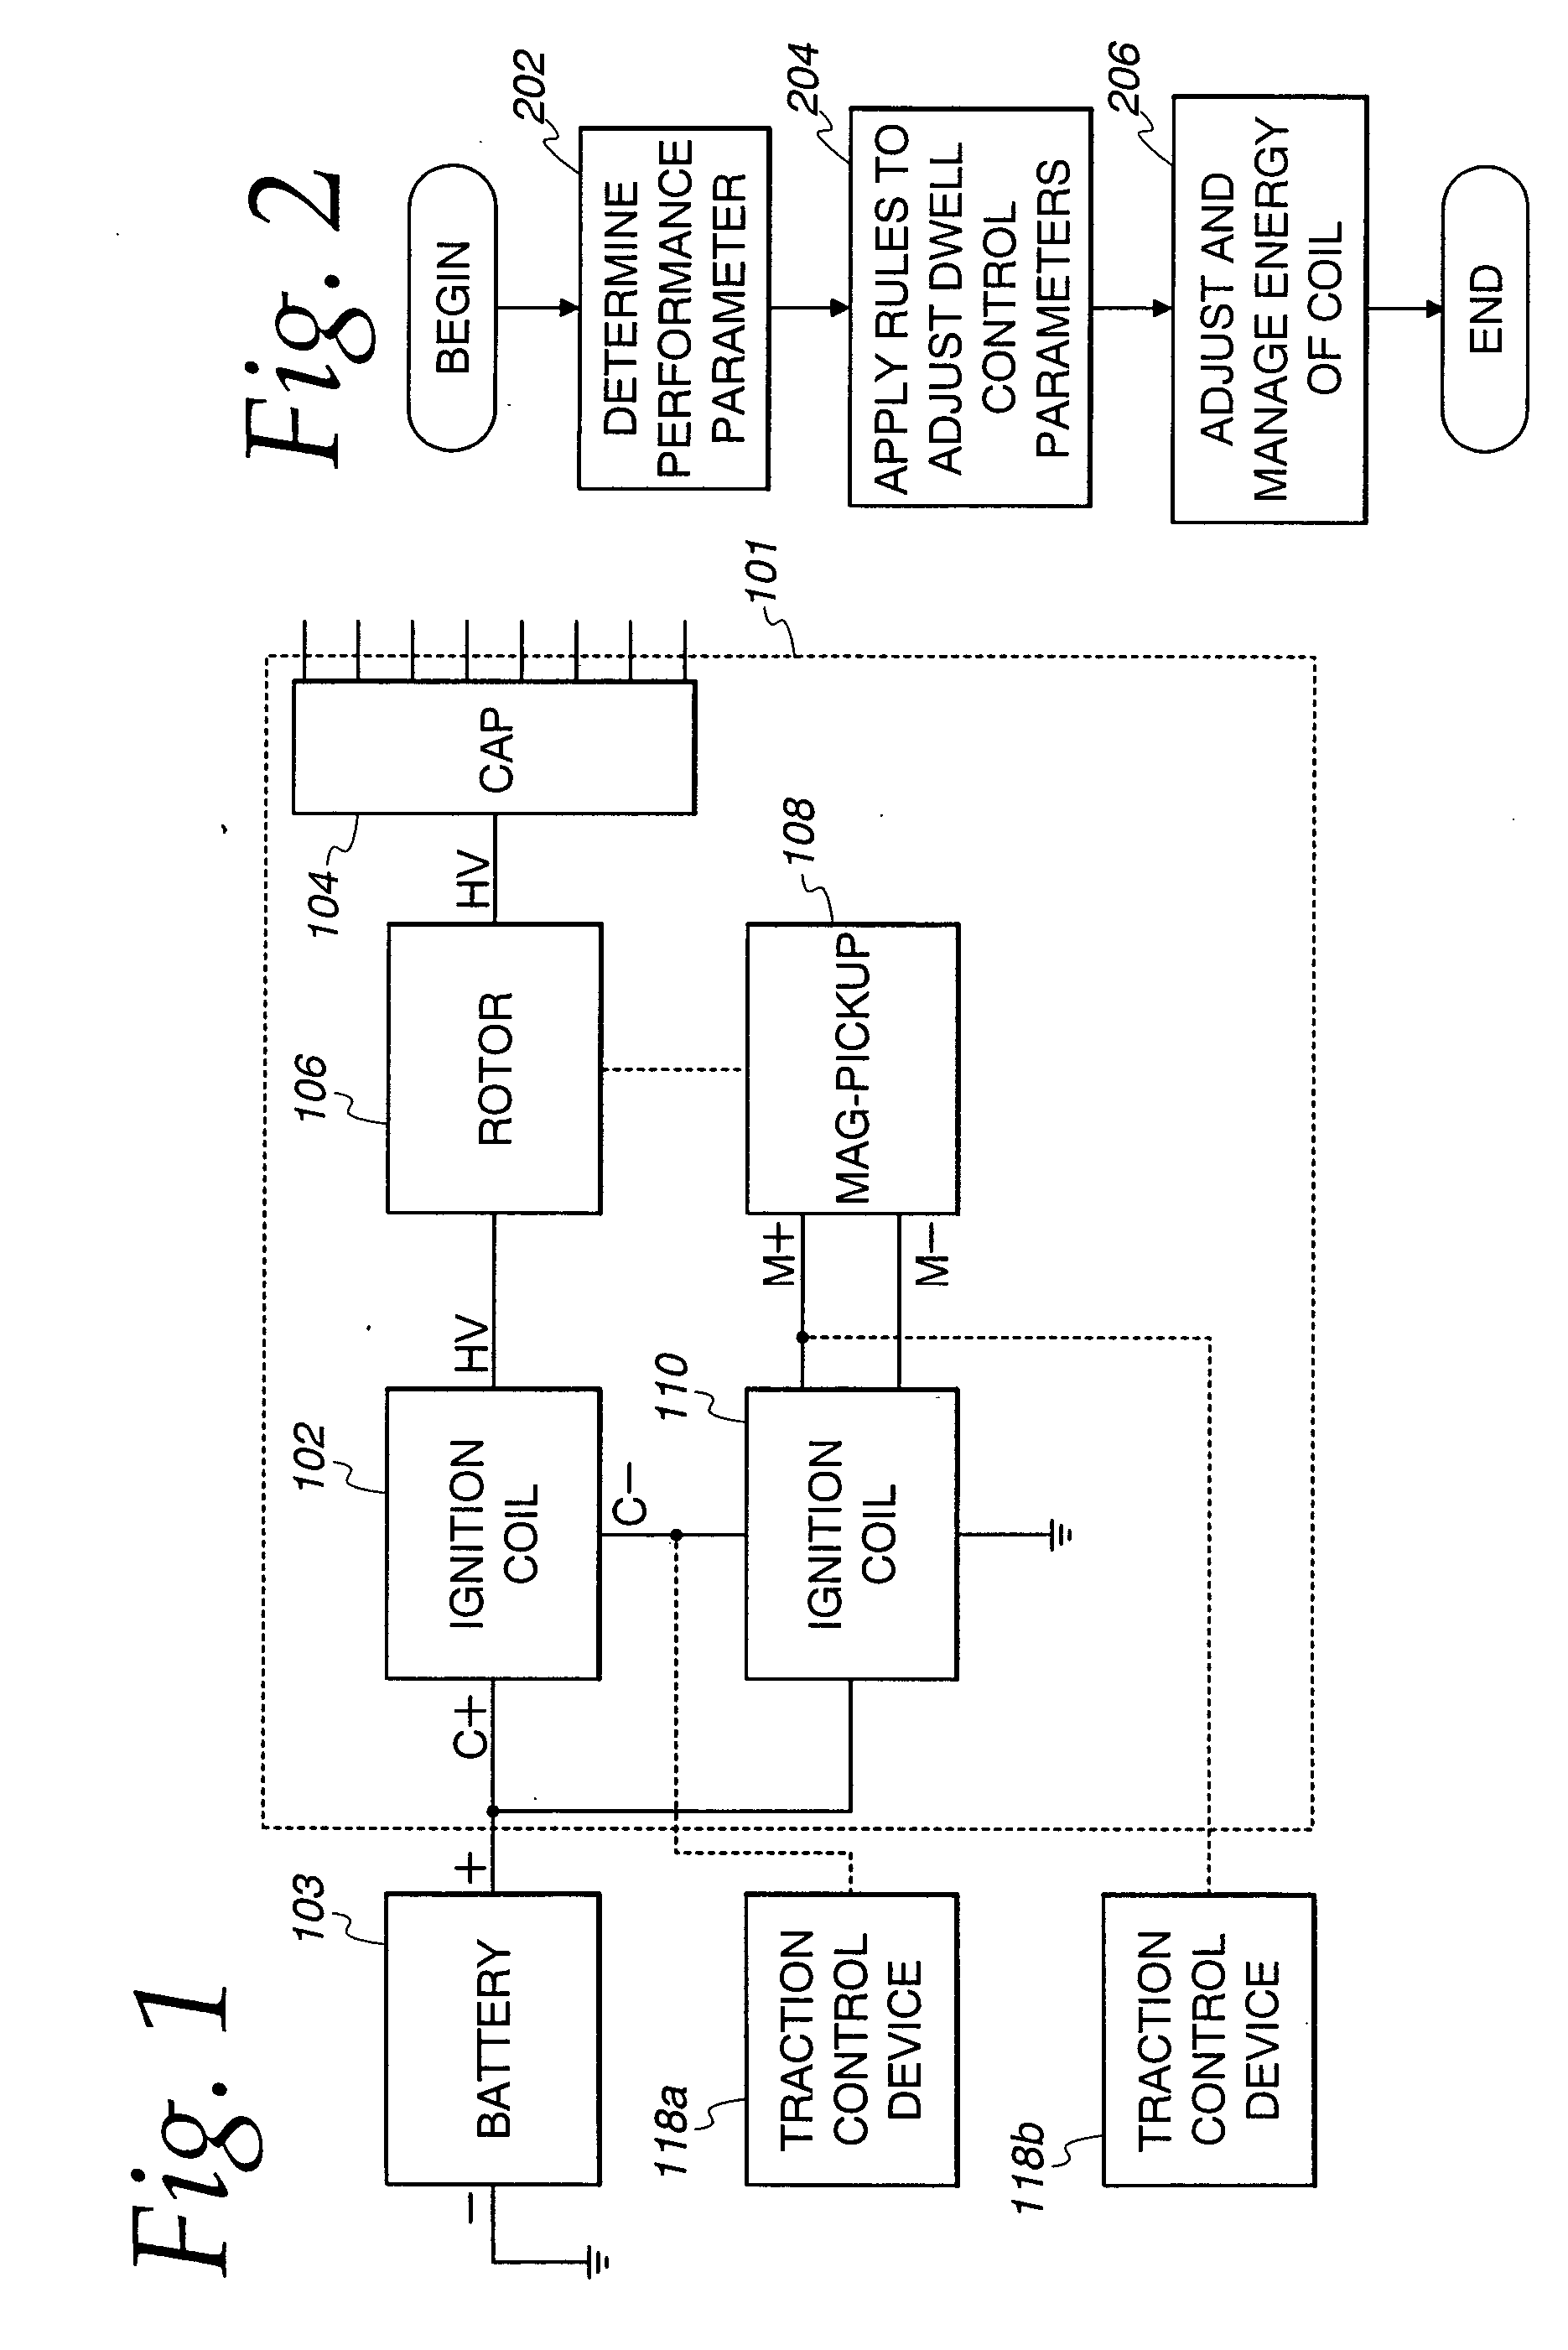 High energy ignition method and system using pre-dwell control